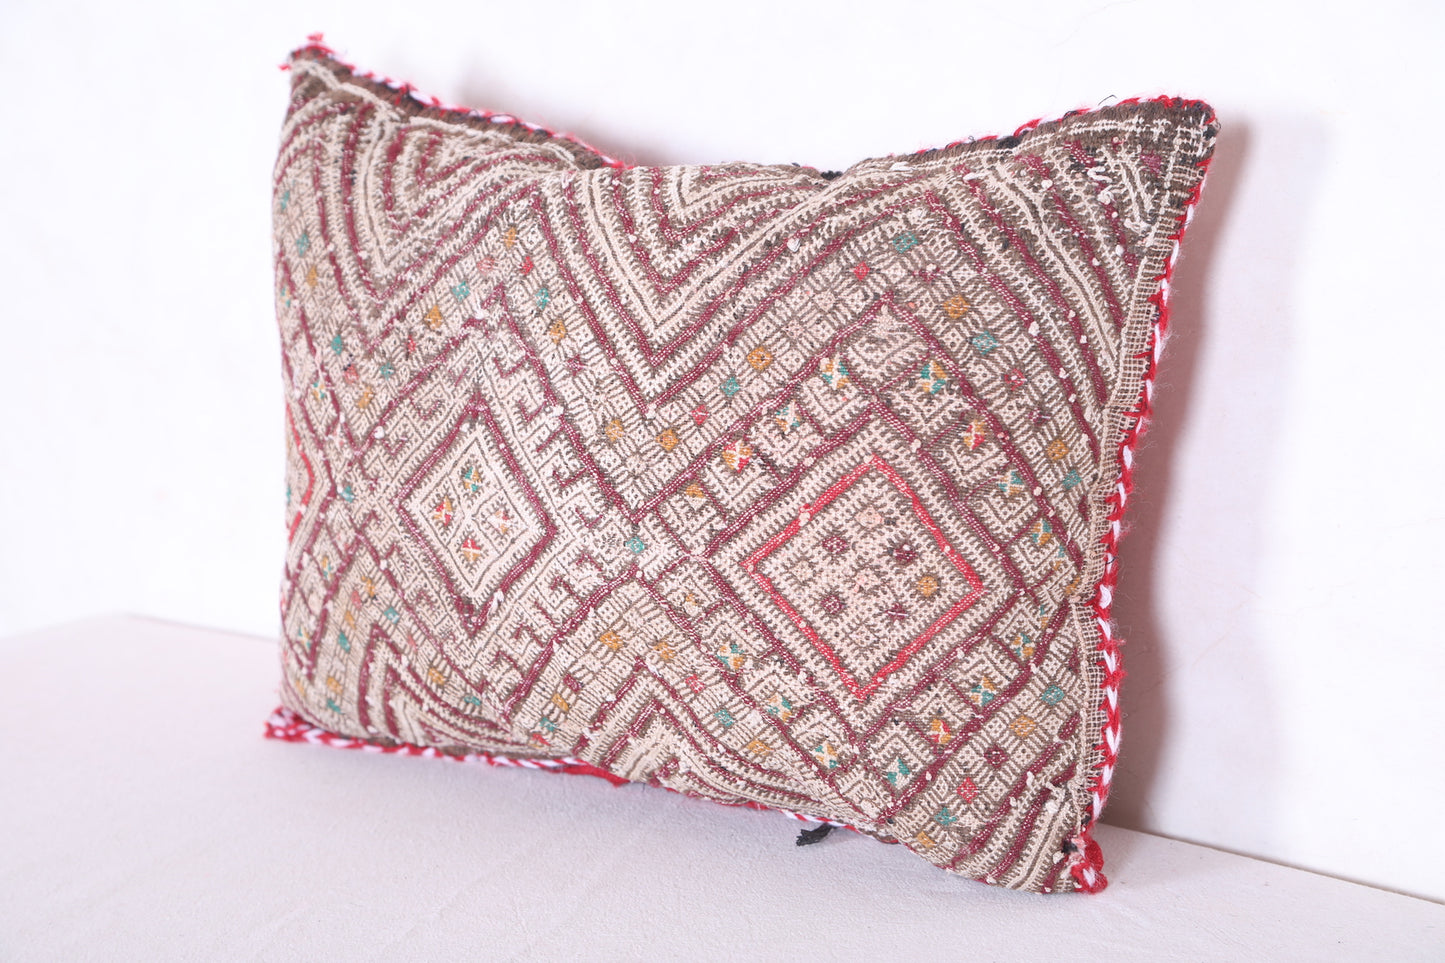 Moroccan handmade kilim pillow 14.1 INCHES X 19.6 INCHES